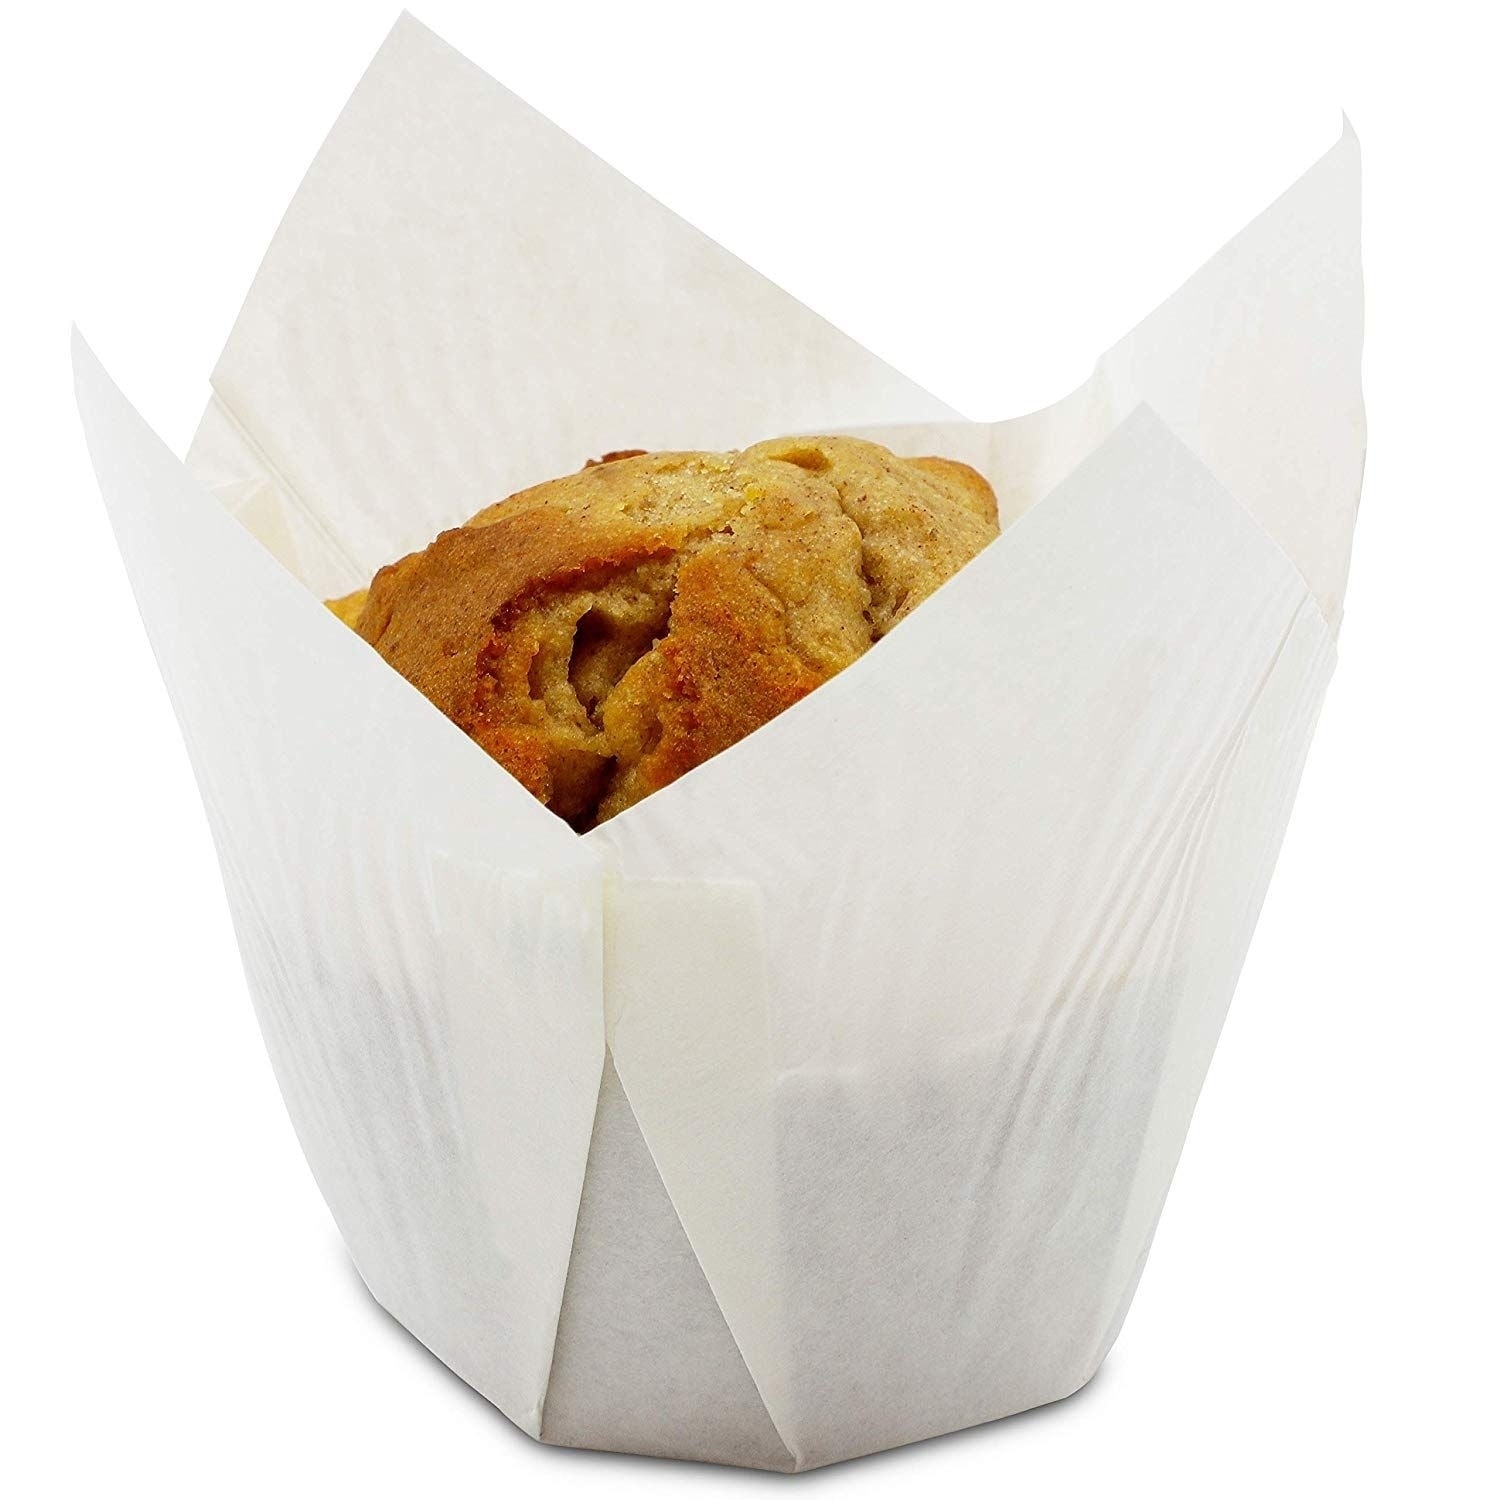 https://ak1.ostkcdn.com/images/products/29172699/100-Pack-White-Tulip-Muffin-Wrappers-Large-Cupcake-Paper-Liners-Baking-Cups-82329ec4-0775-4de9-a98b-fa3ada961f1f.jpg